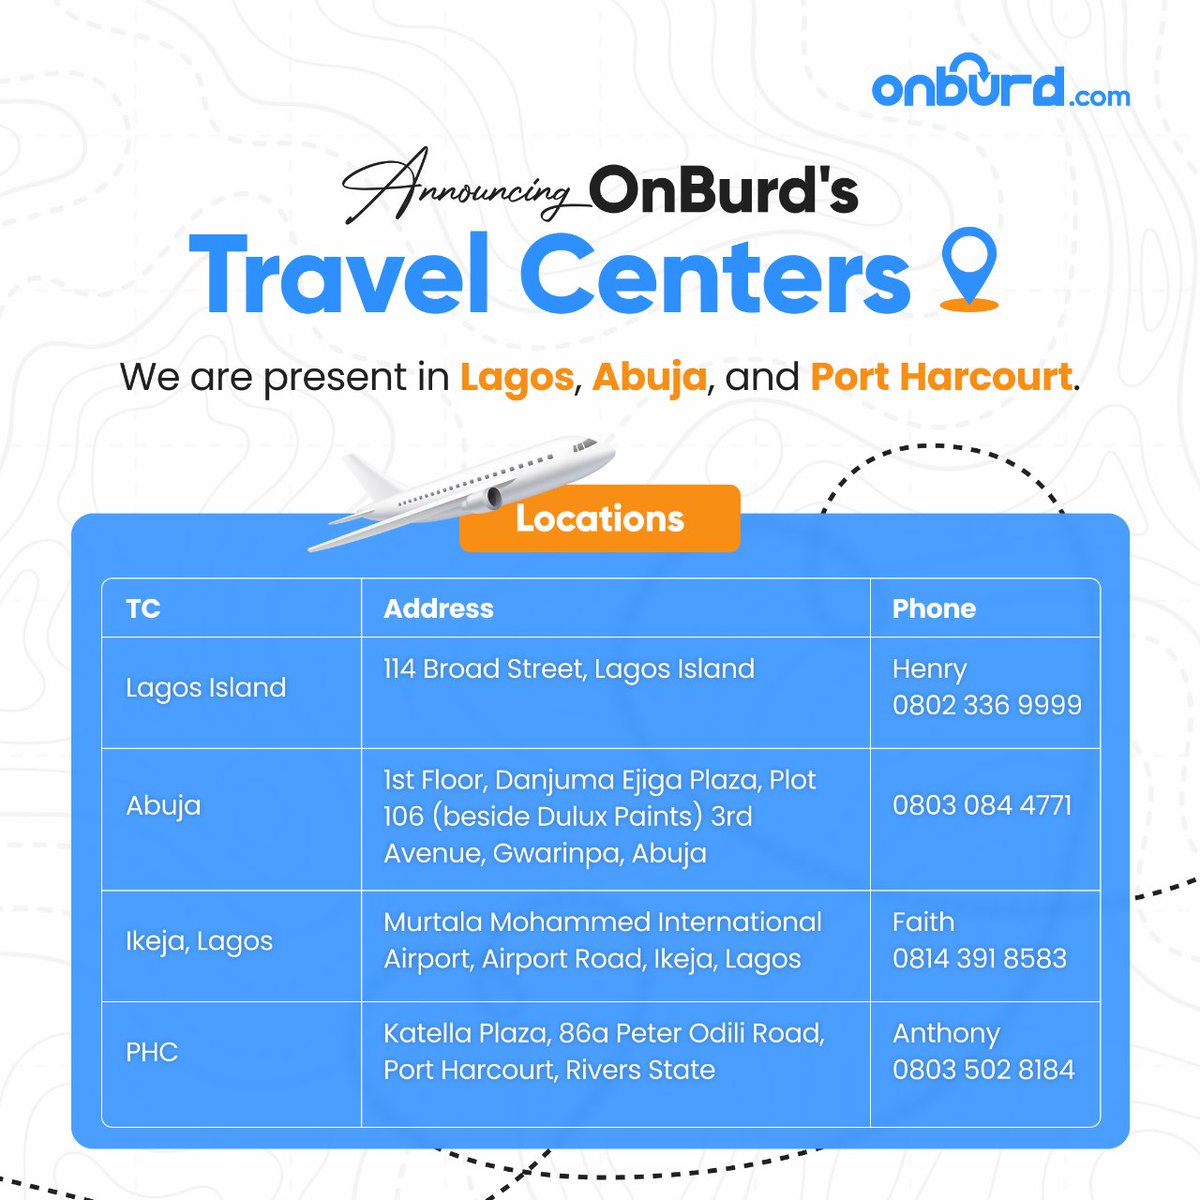 Wondering where to find us? Here are all our current travel center locations.

#GetonBurd #AdventureAwaits #OnBurd #Adventure #Travel #BecomingAnOnBurder #lagos #summer #summervacation #summeradventures #summerholiday #portharcourt #abuja